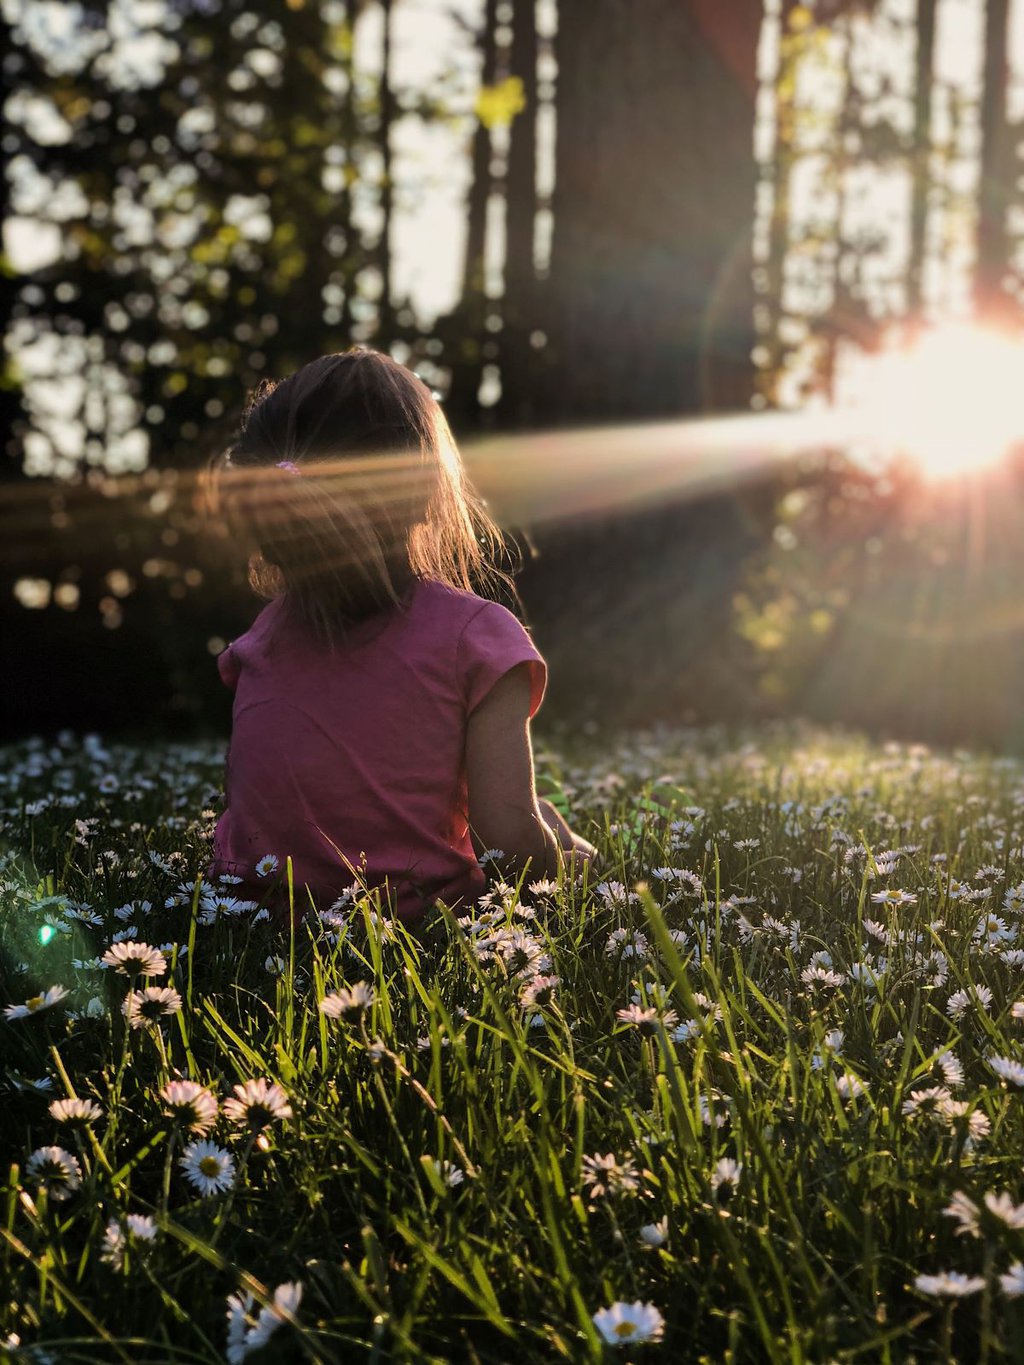 10 Easy Mindfulness Activities For Children And Their Families